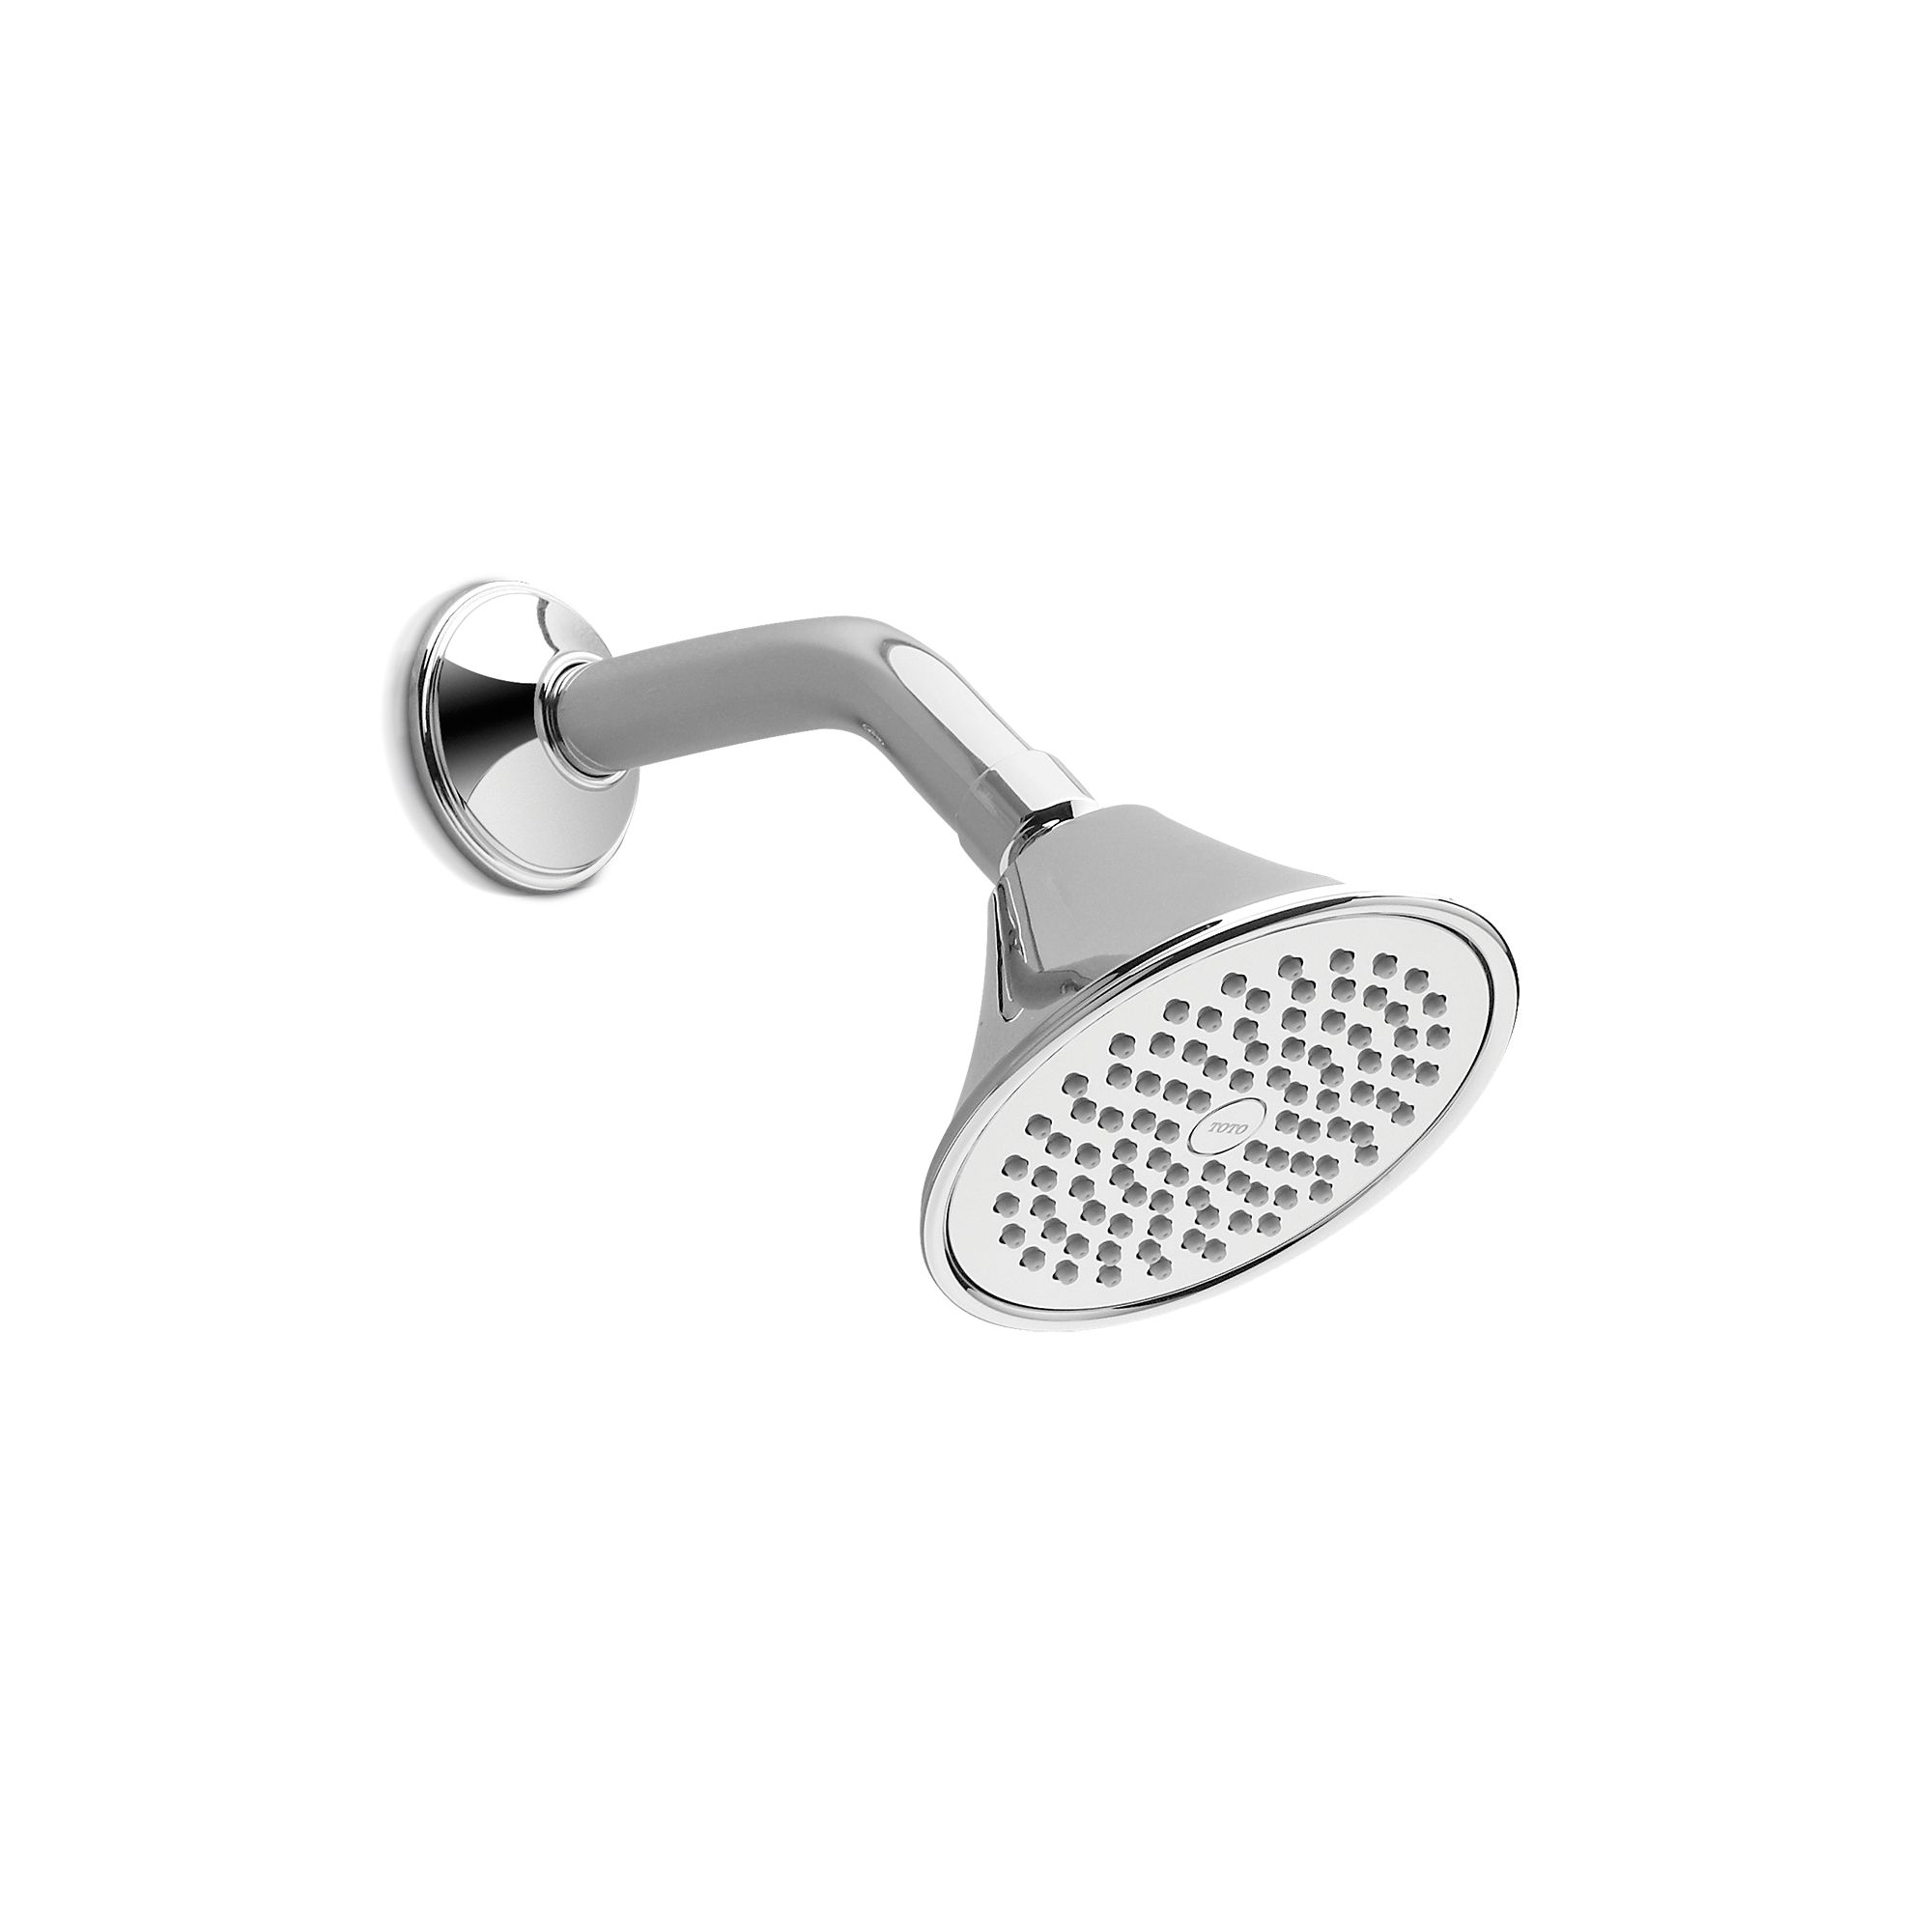 Transitional Collection Series A Single-spray Showerhead 4-1/2"